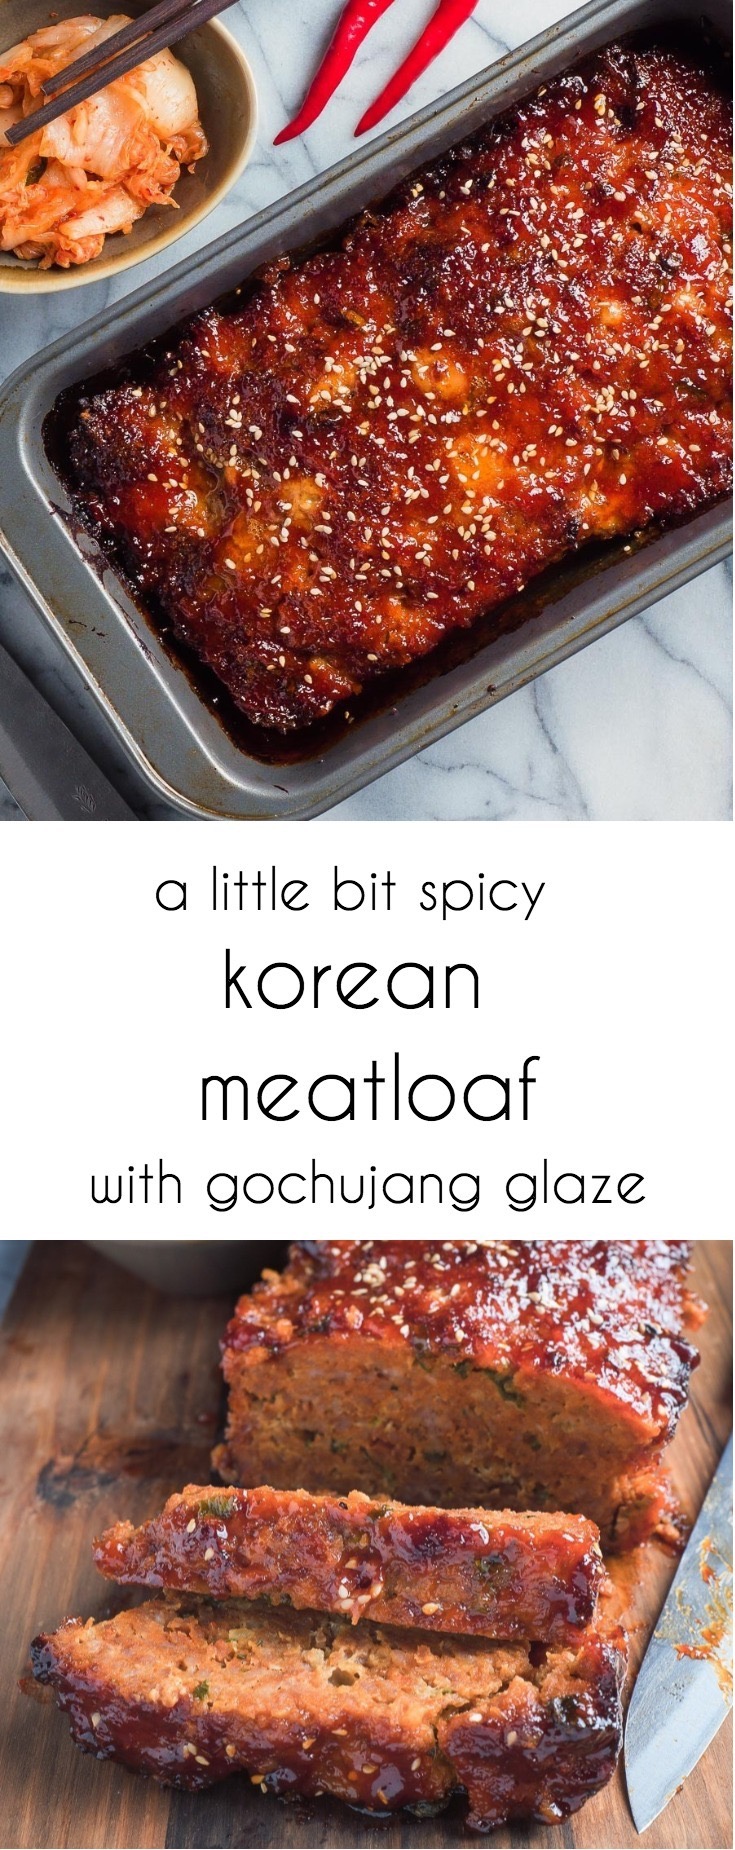 Korean meatloaf with gochujang glaze is perfect when you want something new.